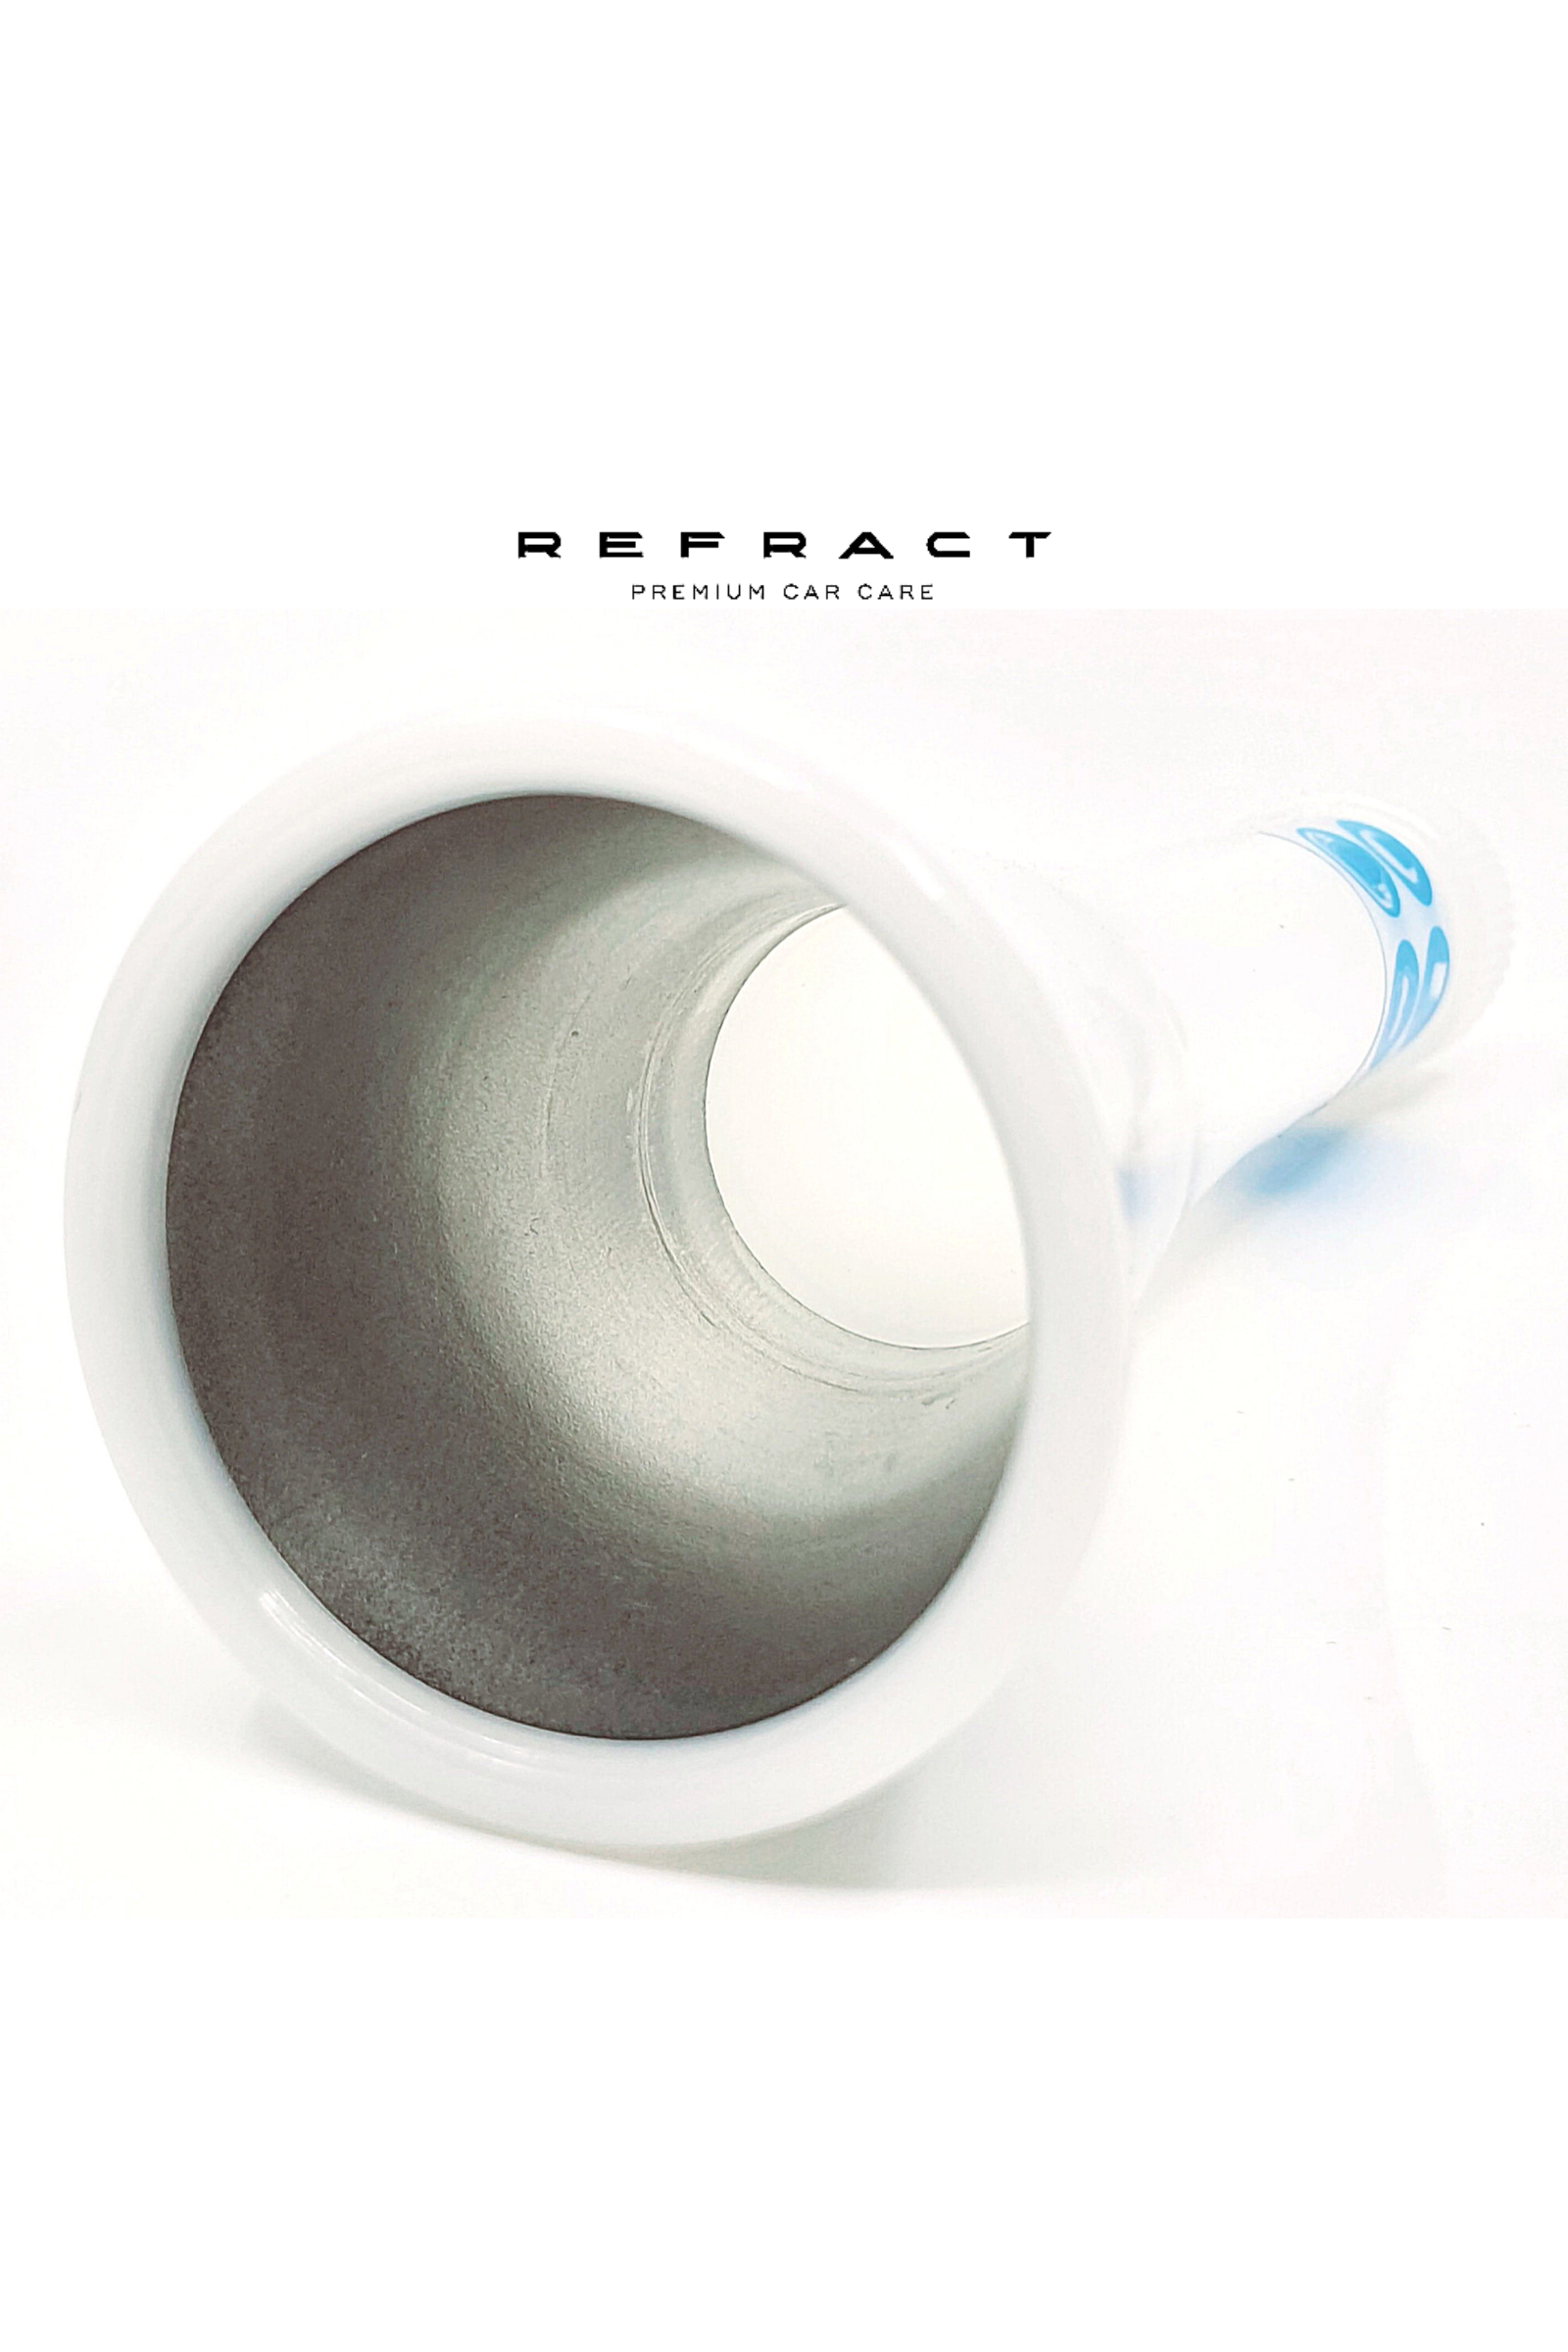 Refract Premium Car Care Products Refract Fury Lite Tornador Replacement Velocity Cone $23.95